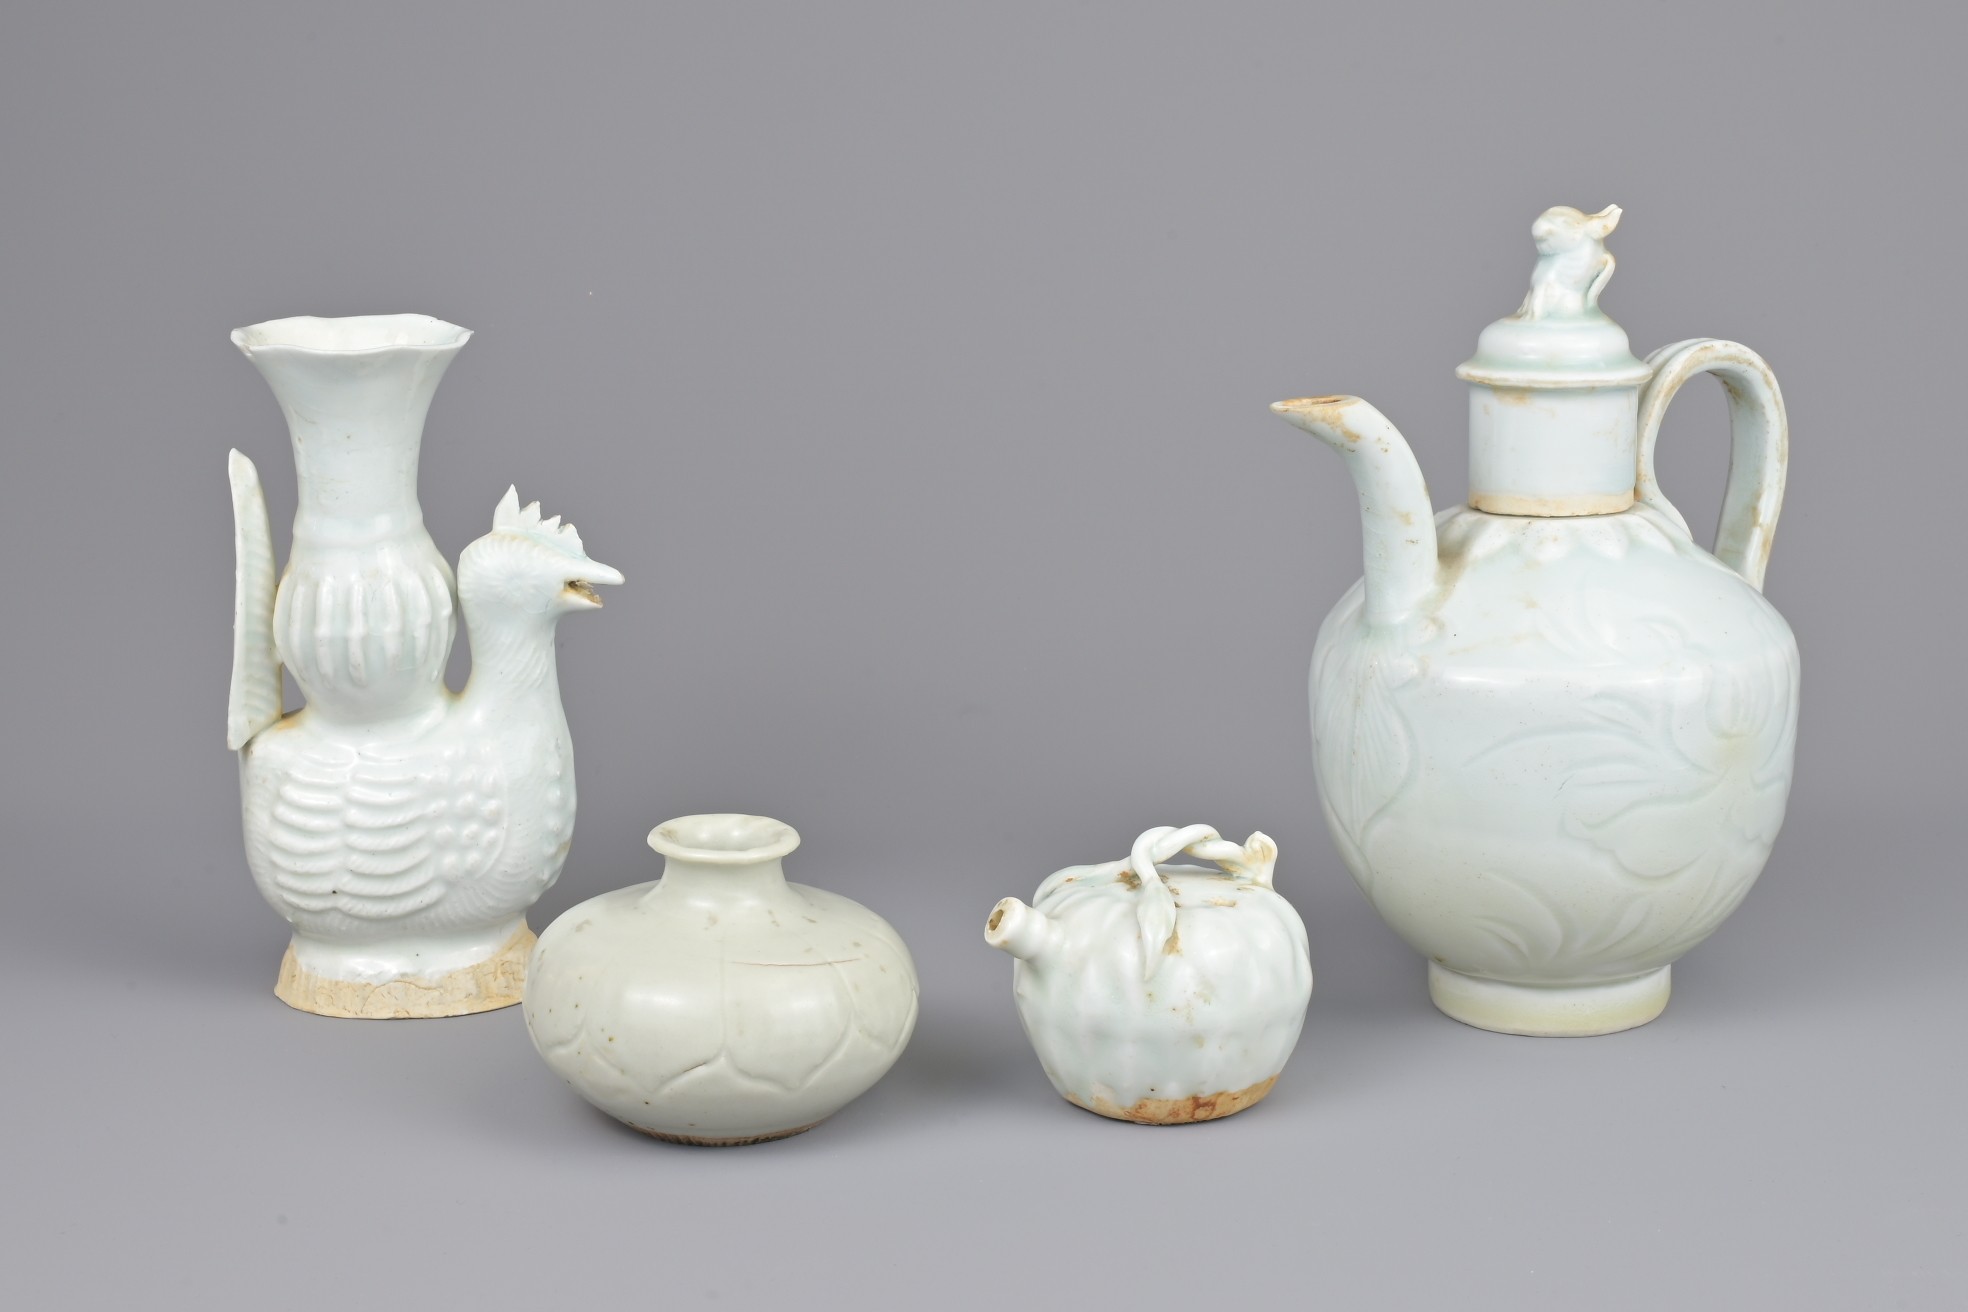 FOUR CHINESE QINGBAI PORCELAIN ITEMS. To include a jarlet, chicken form ewer, water dropper in the